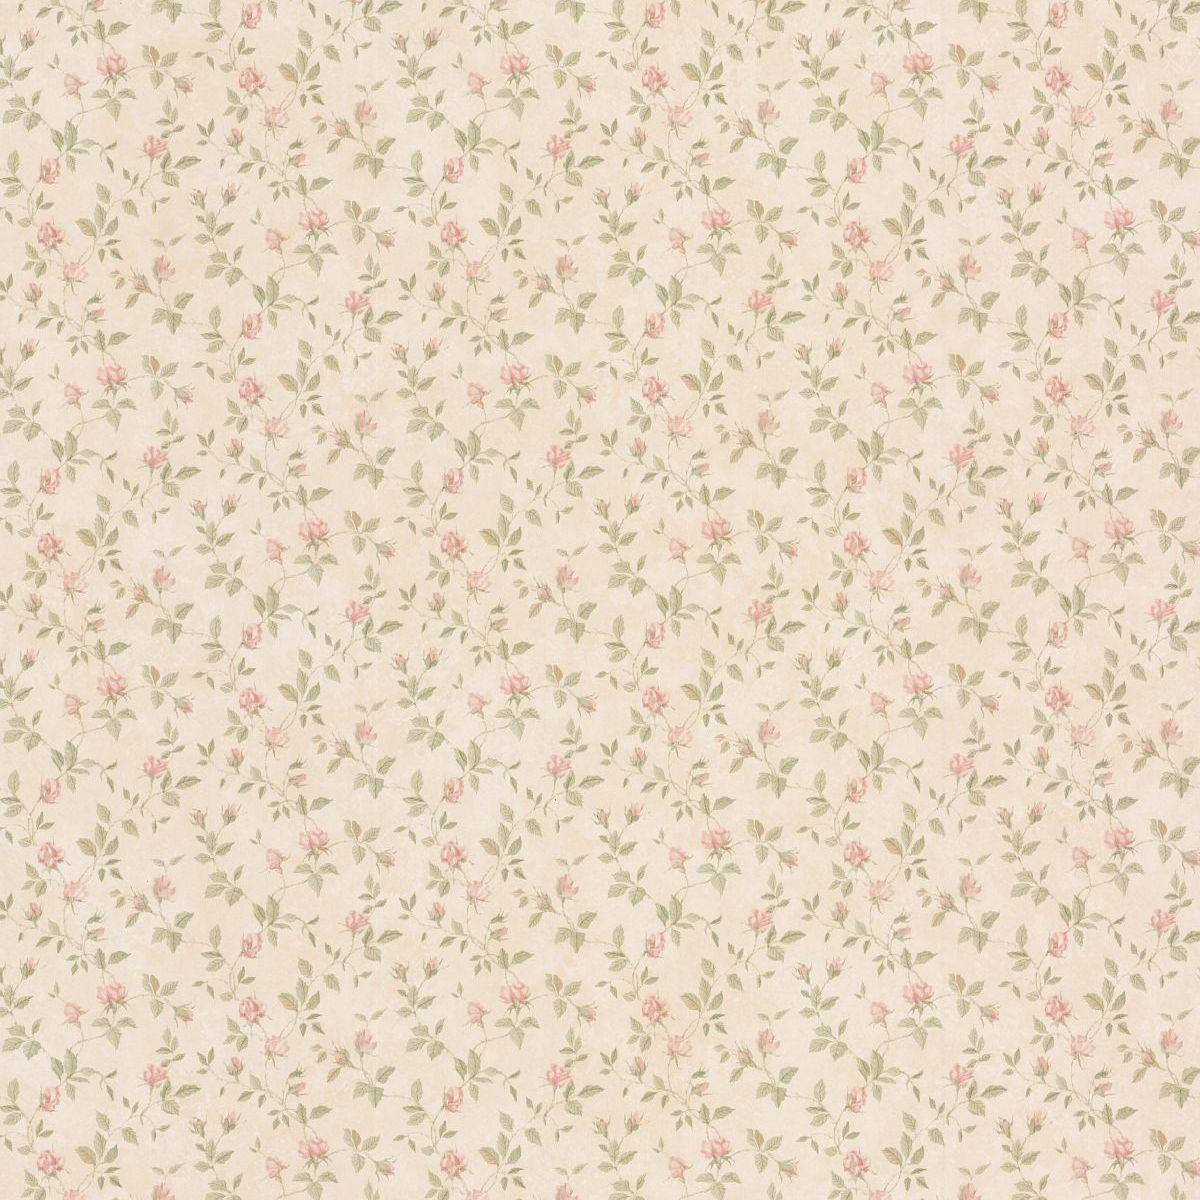 Dollhouse Vintage Rose Wall Covering Background